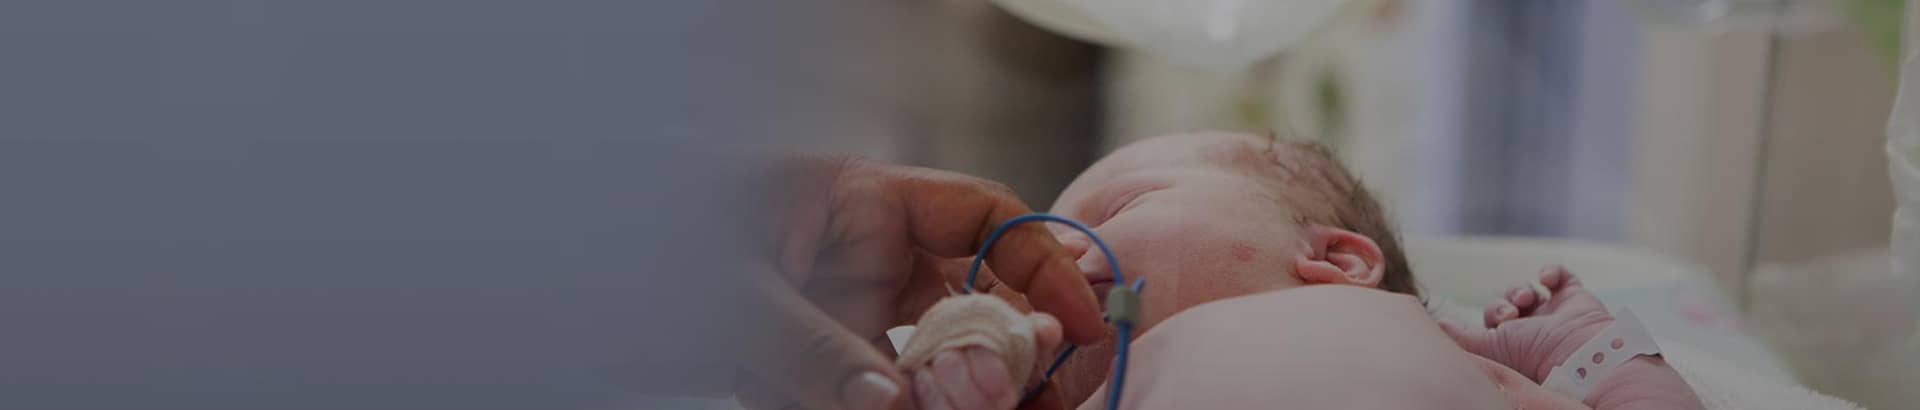 Infant resting in the NICU